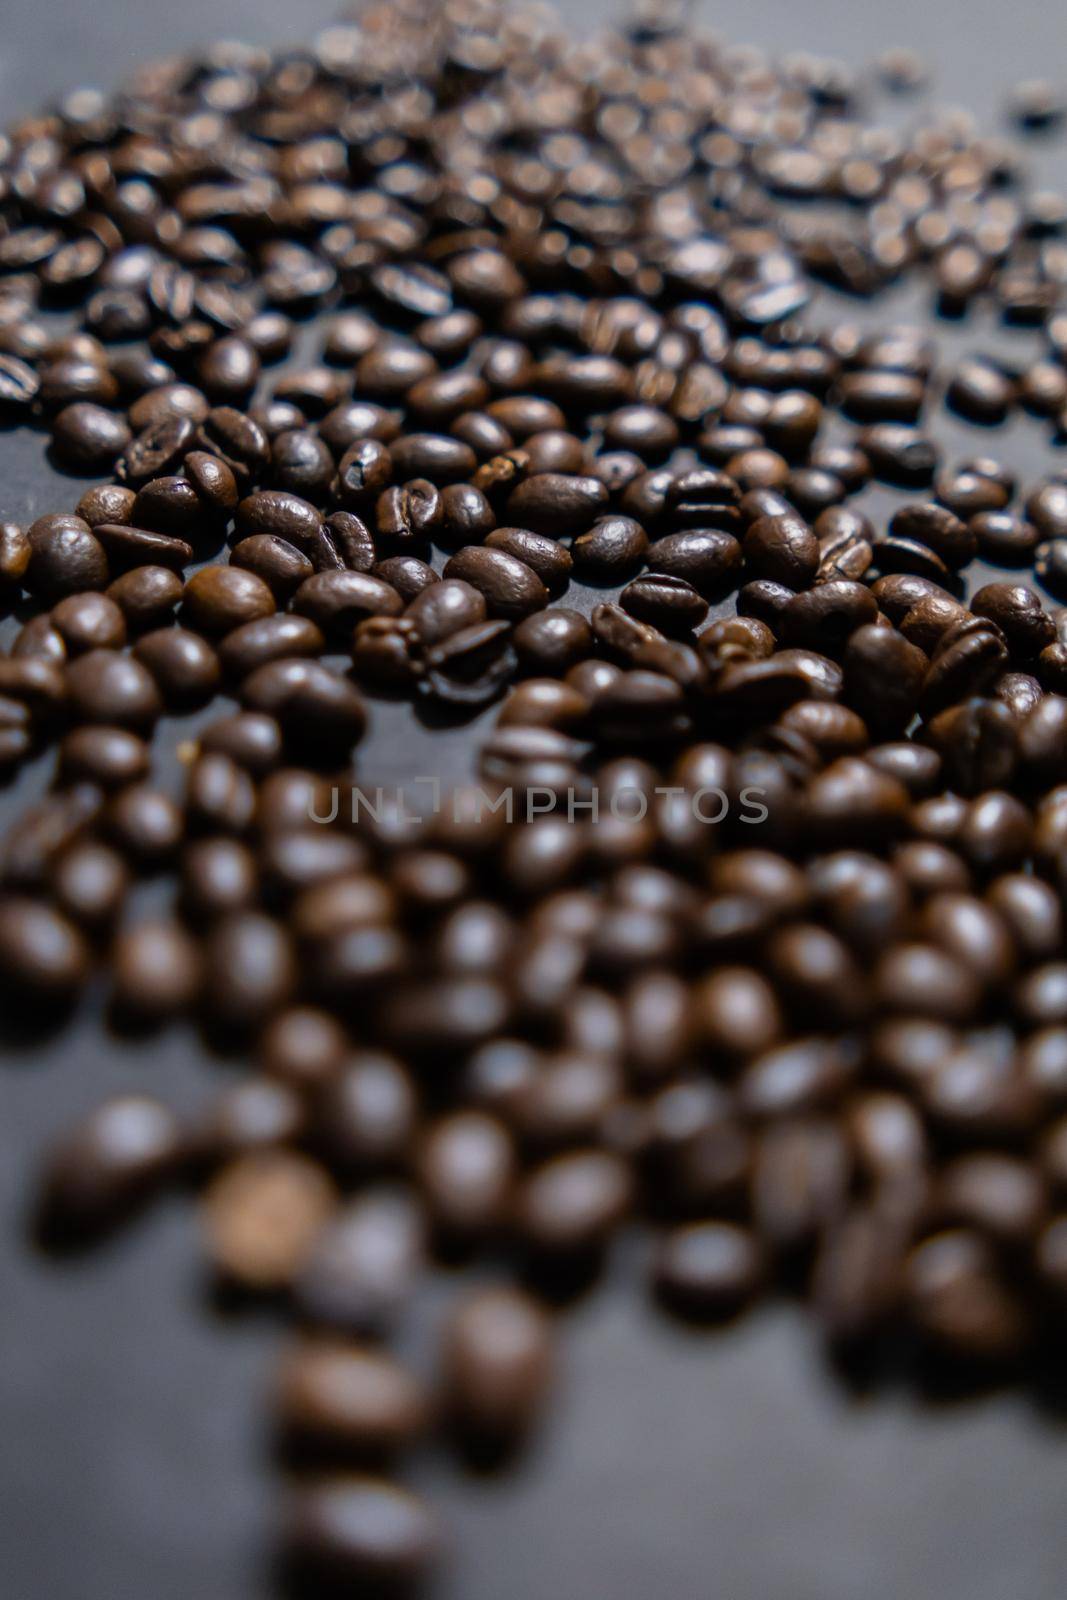 Close-up of small pile of roasted coffee beans on dark gray surface. Group of coffee grains scattered above dark color background. Caffeine and drink preparation